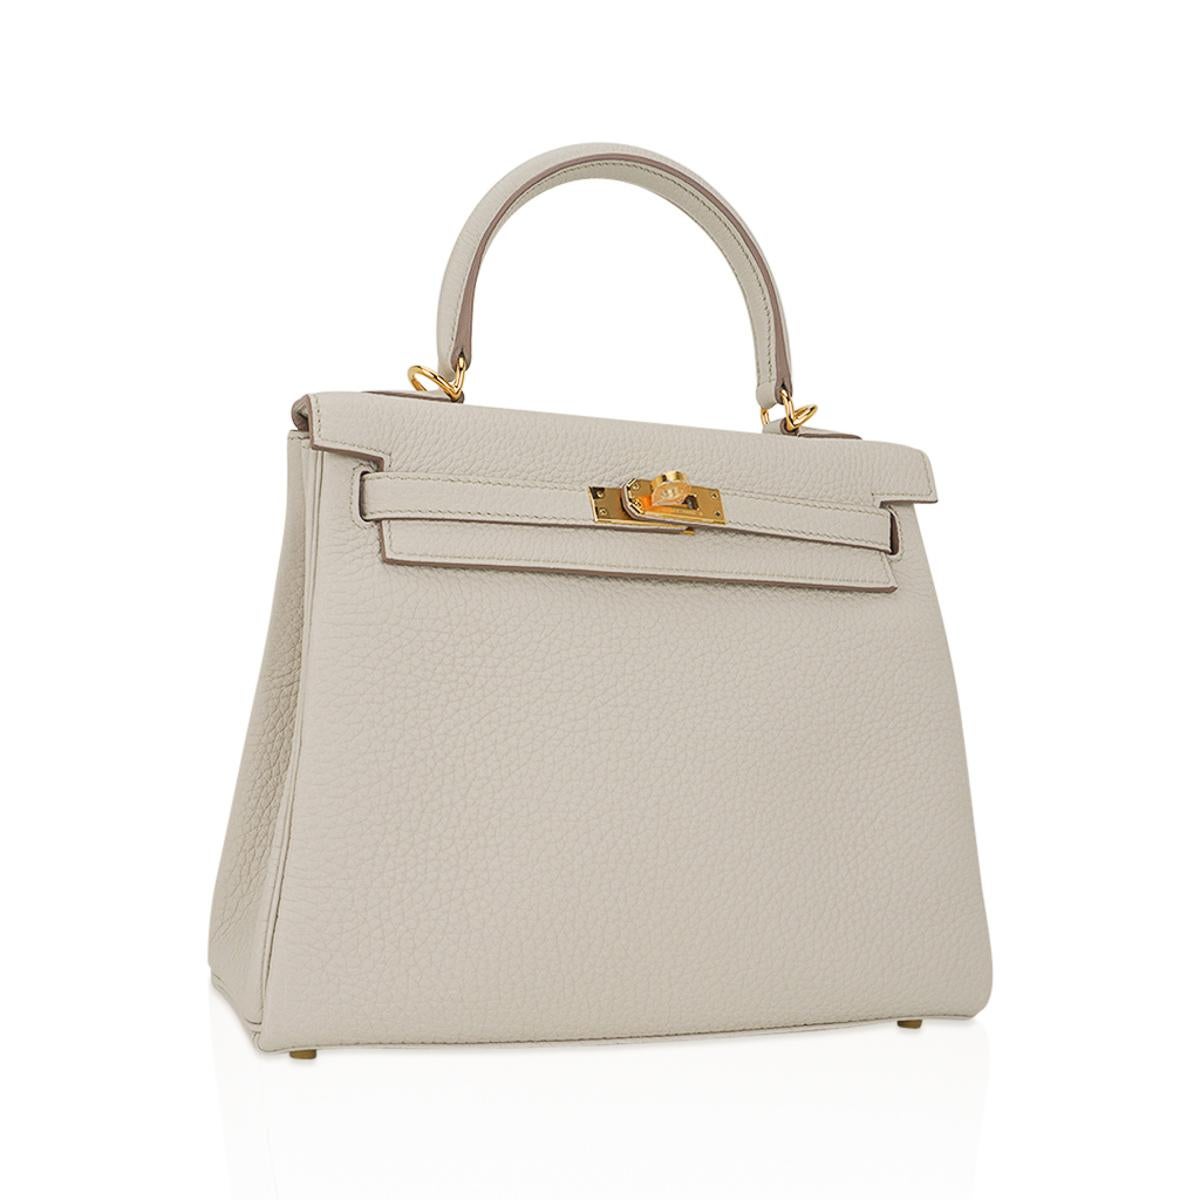 Mightychic offers an Hermes Kelly 25 bag featured in coveted Beton.
This signature Hermes Kelly retourne bag is accentuated with lush gold hardware.
Togo leather is supple and scratch resistant.
Comes with lock, keys, clochette, sleepers, raincoat